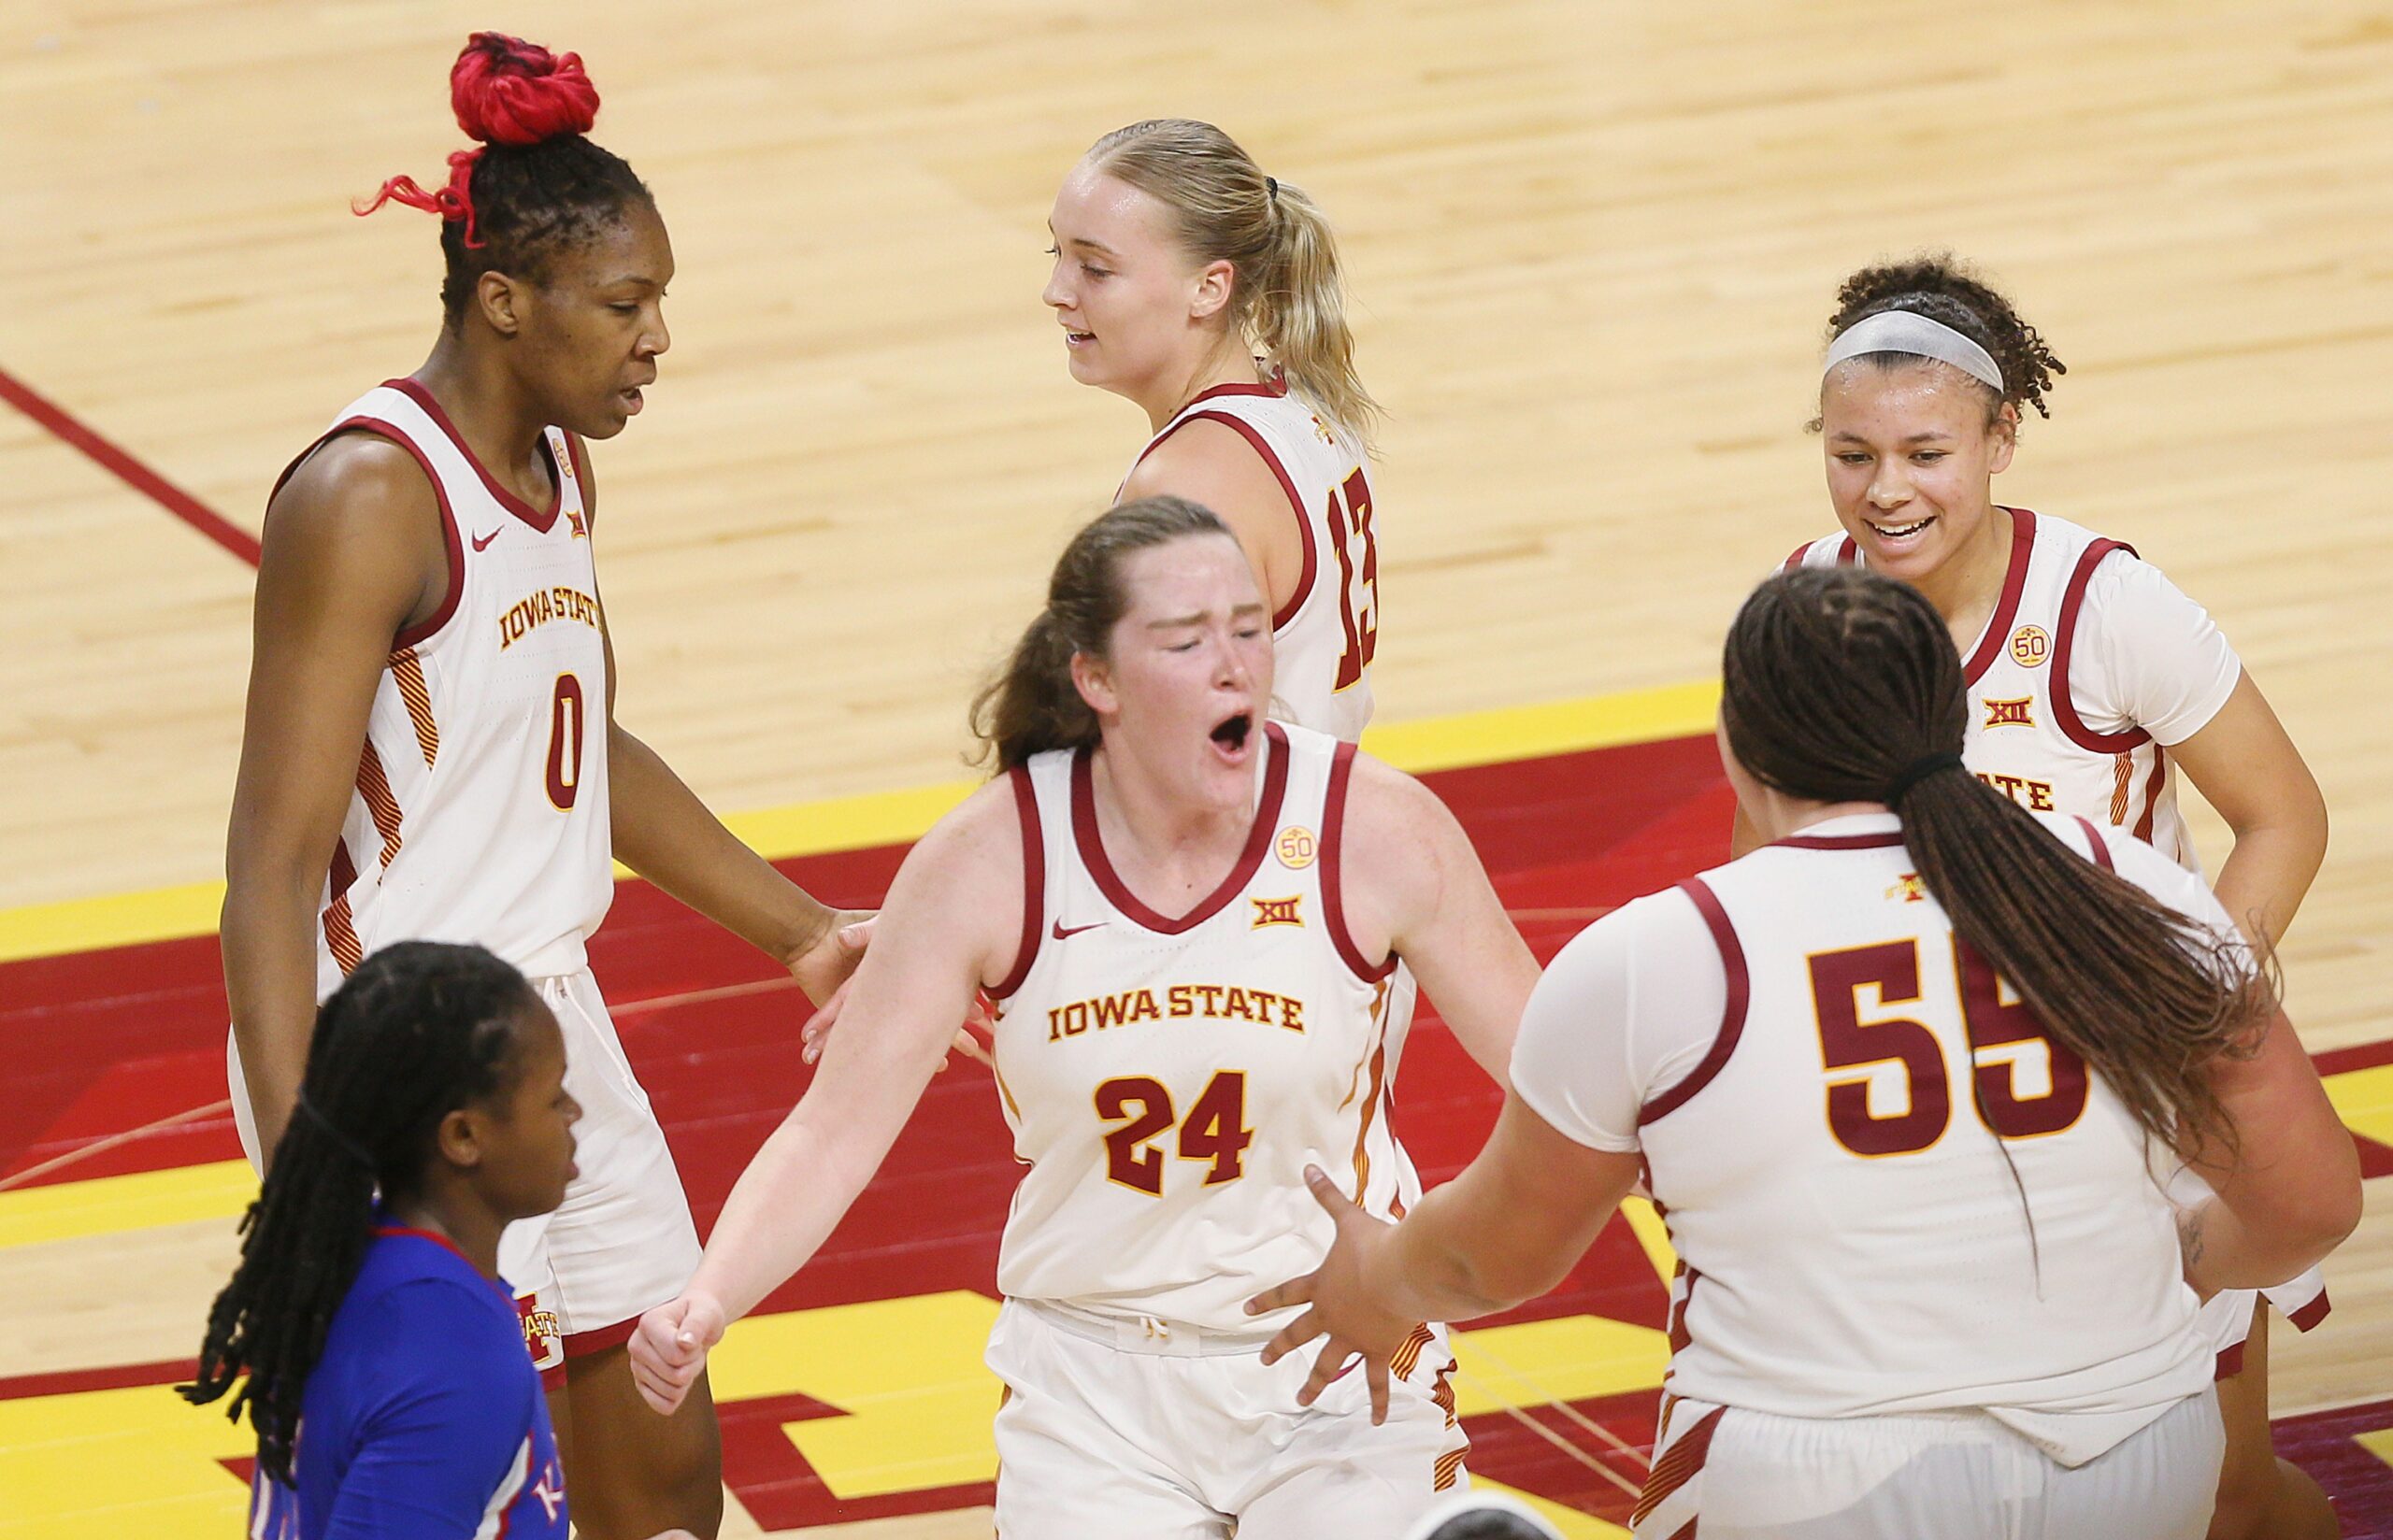 ISU's Addy Brown seeks to continue to shine against No. 24 West Virginia and beyond